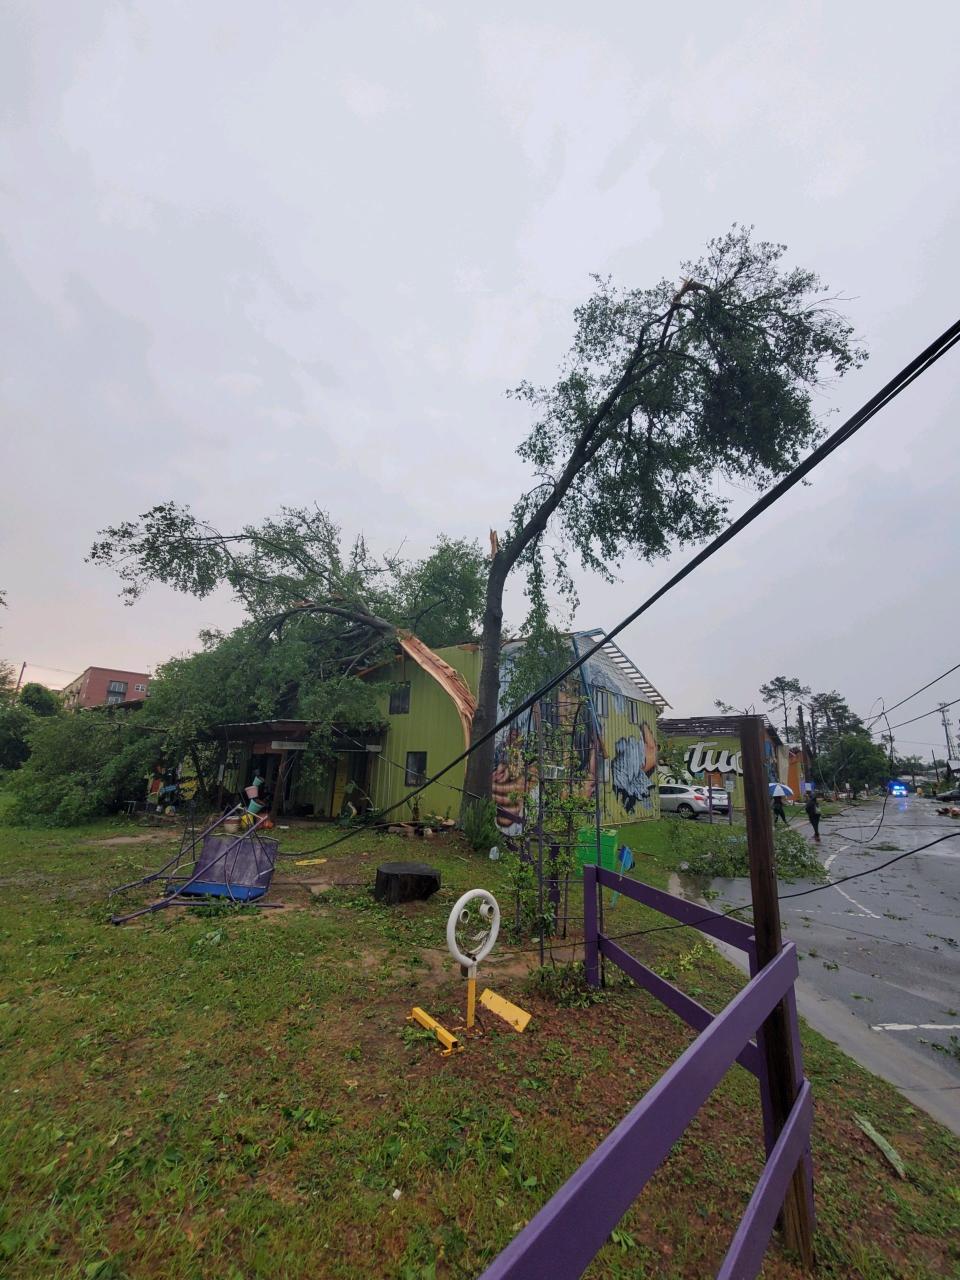 Major damage being seen in the Railroad Square Art District, including split trees and damage to structures.